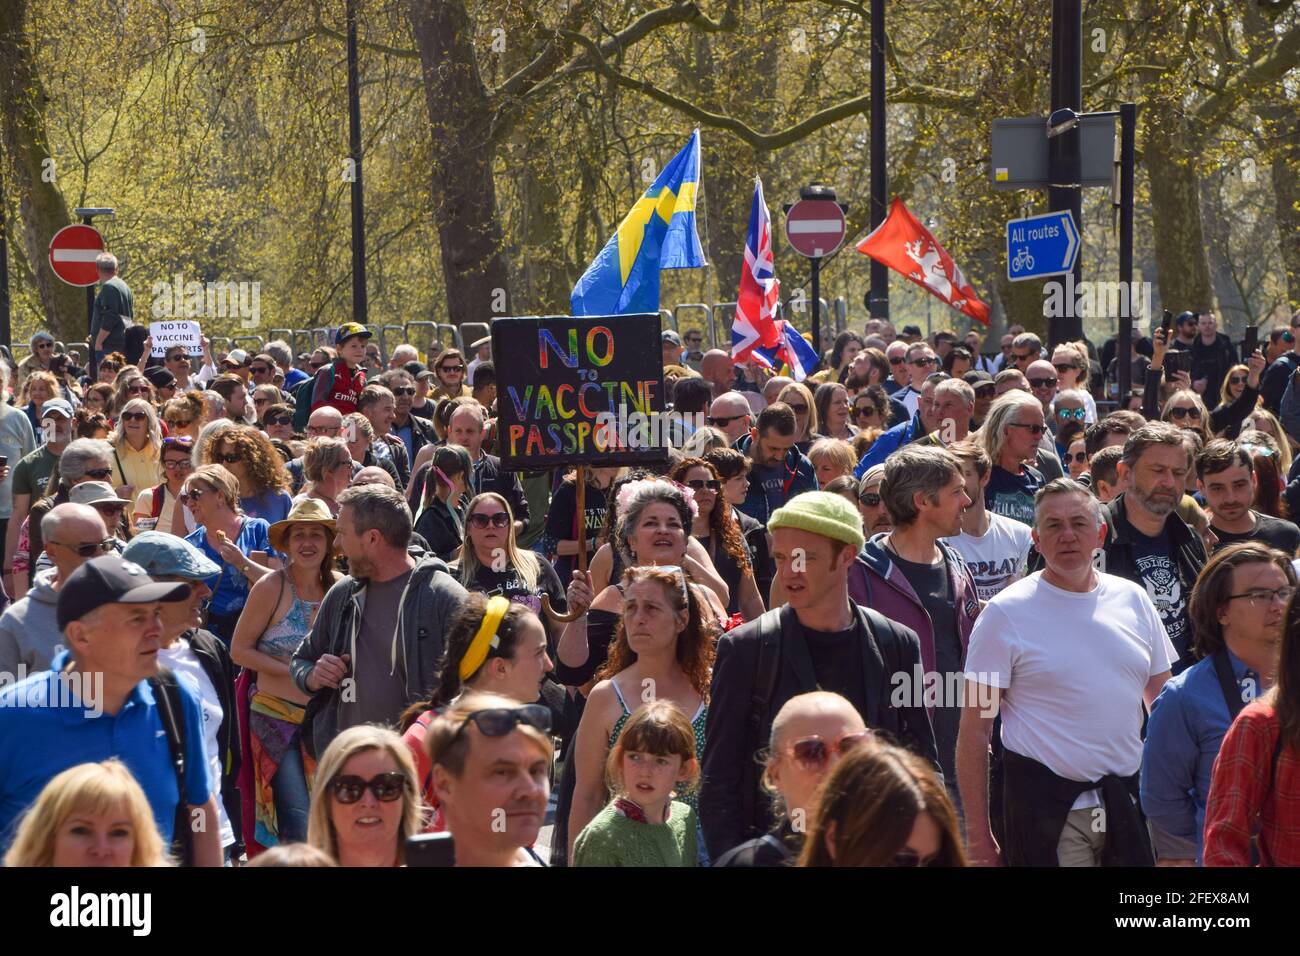 London, United Kingdom. 24th April 2021. Crowds in Park Lane at the anti-lockdown protest. Thousands of people marched through Central London in protest against health passports, protective masks, Covid vaccines and lockdown restrictions. Credit: Vuk Valcic/Alamy Live News Stock Photo